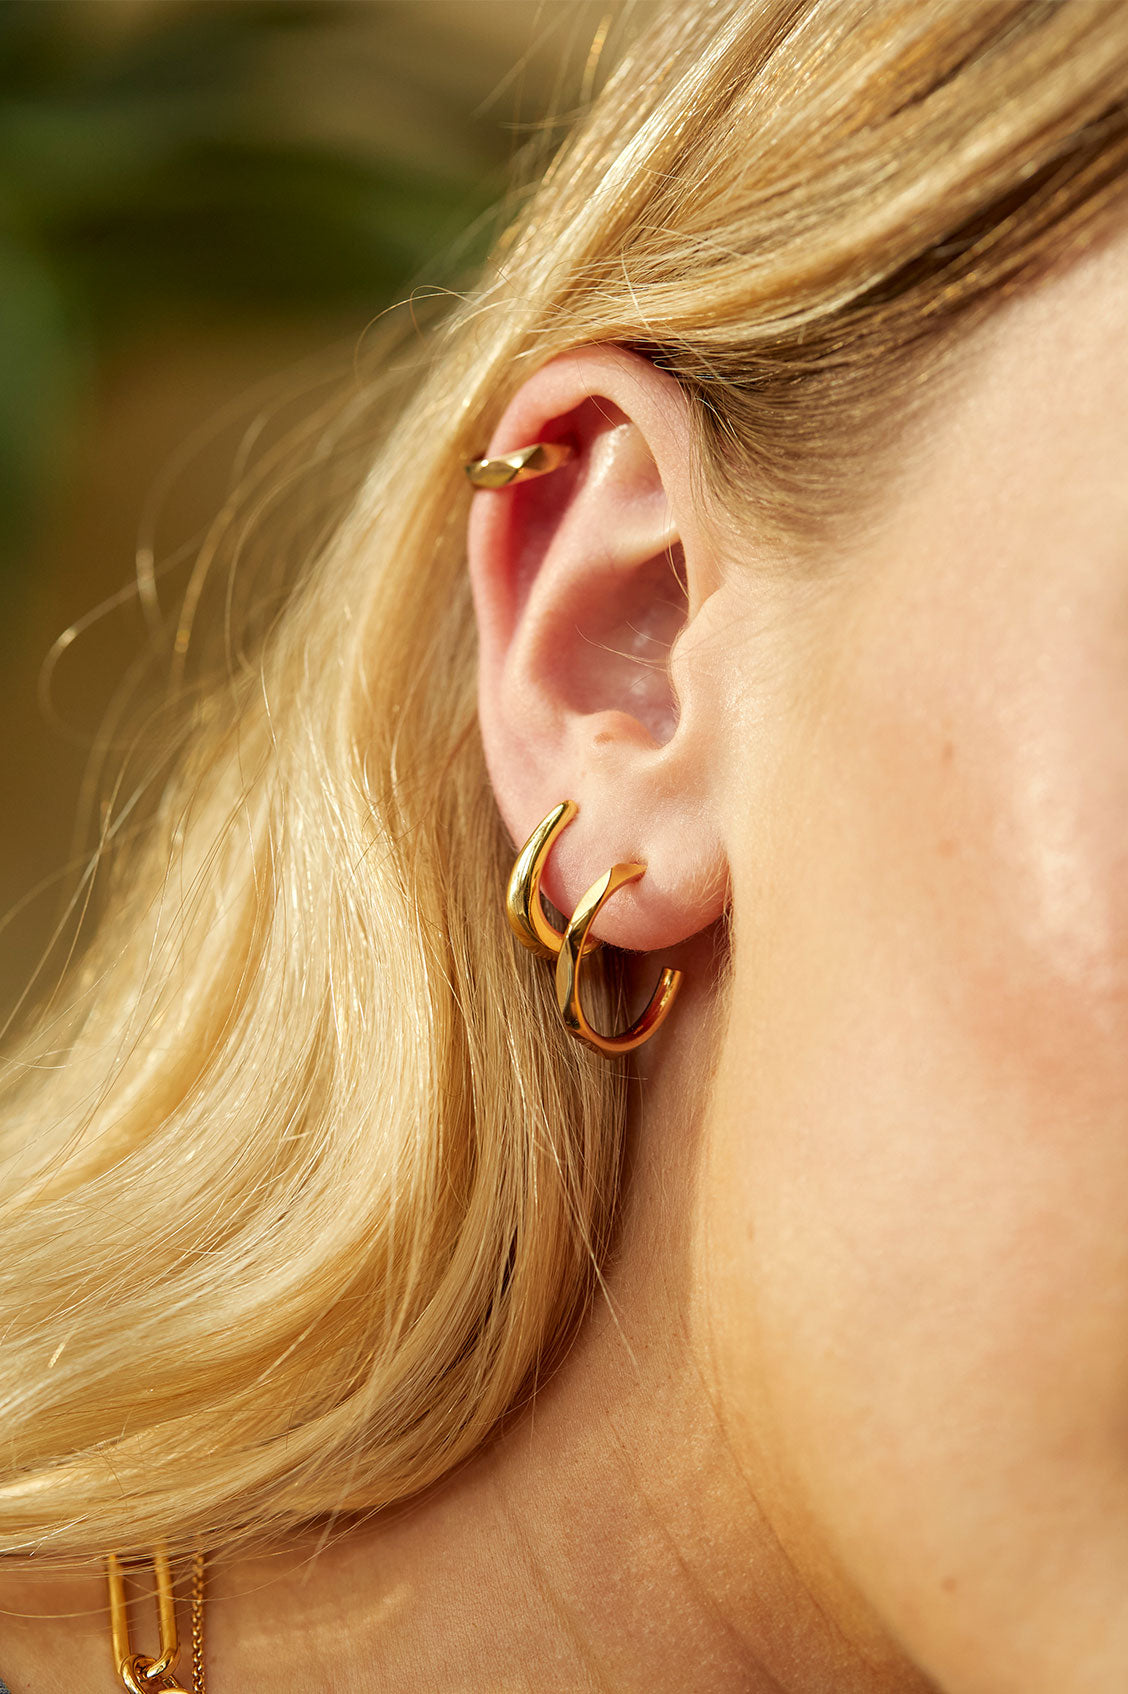 Charlotte Wooning  earrings big hoop  gifts  goods with a clean and  elegant design